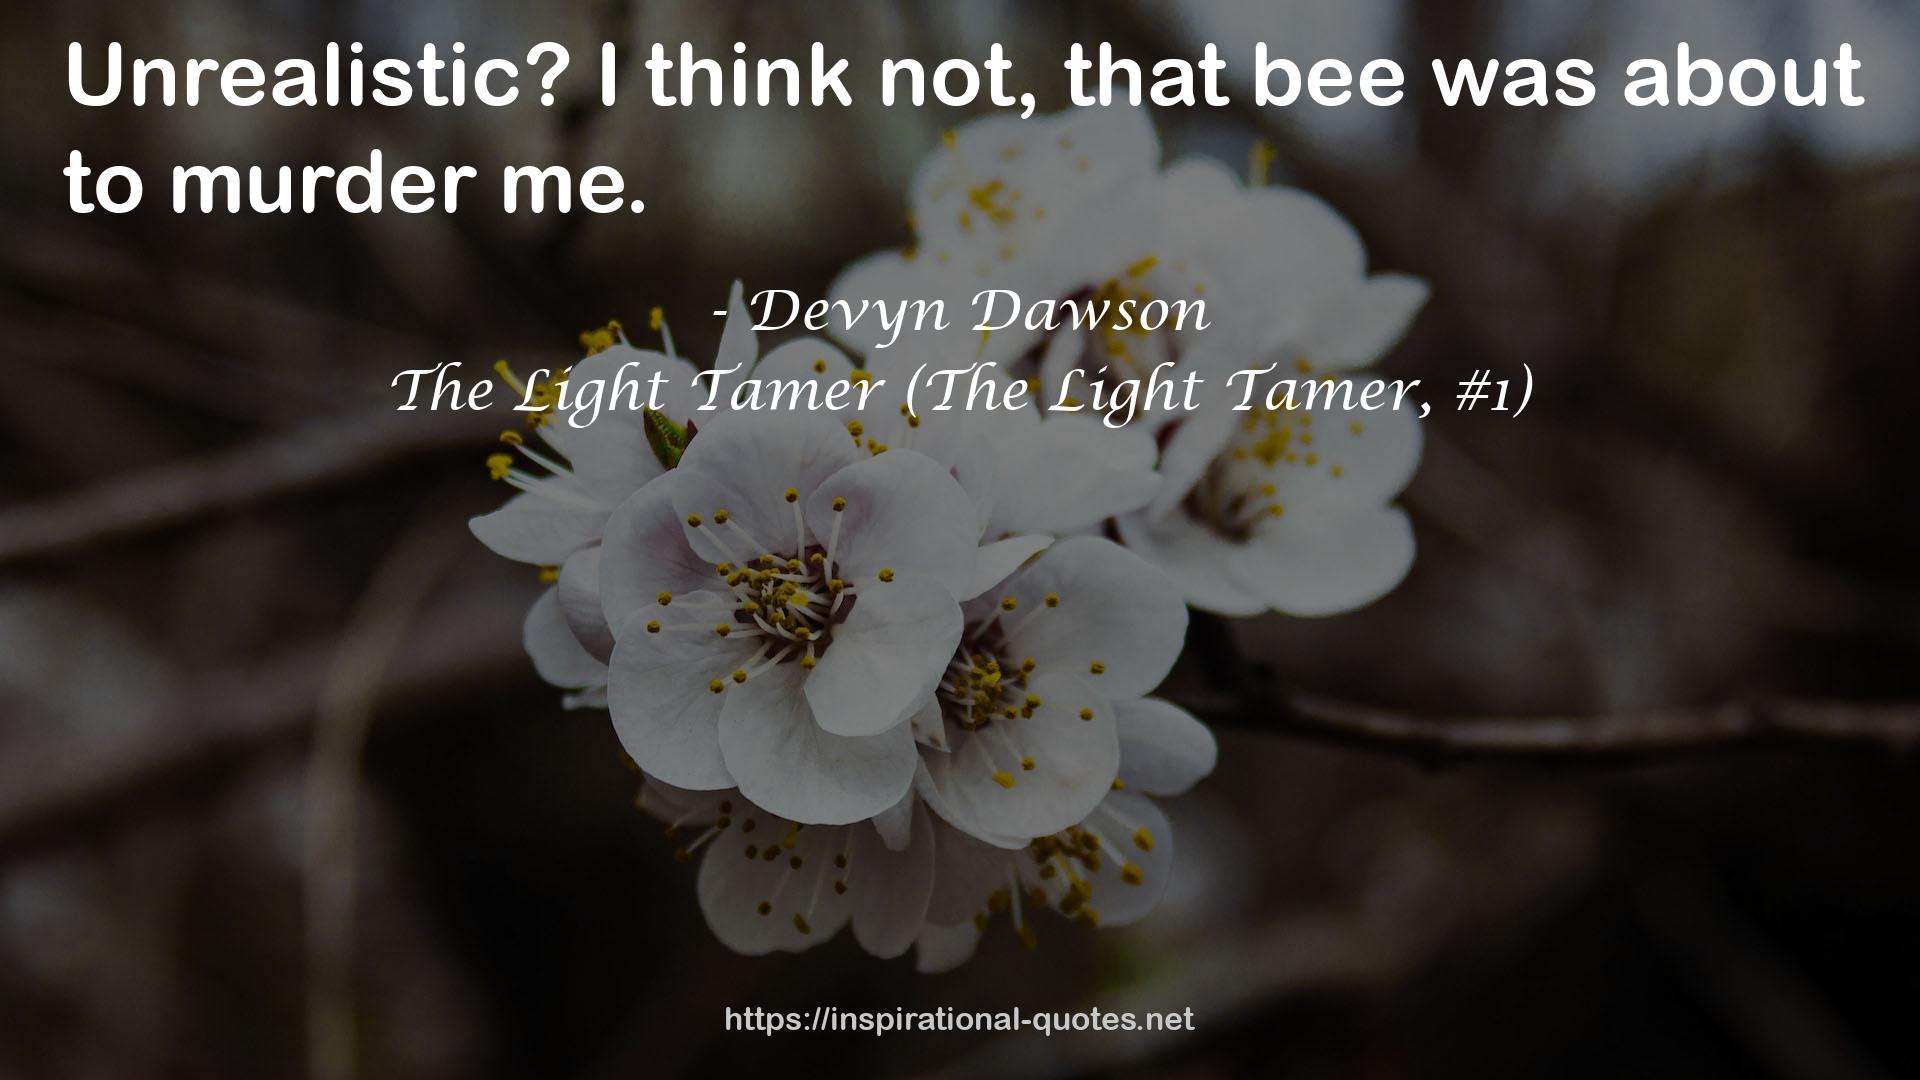 The Light Tamer (The Light Tamer, #1) QUOTES